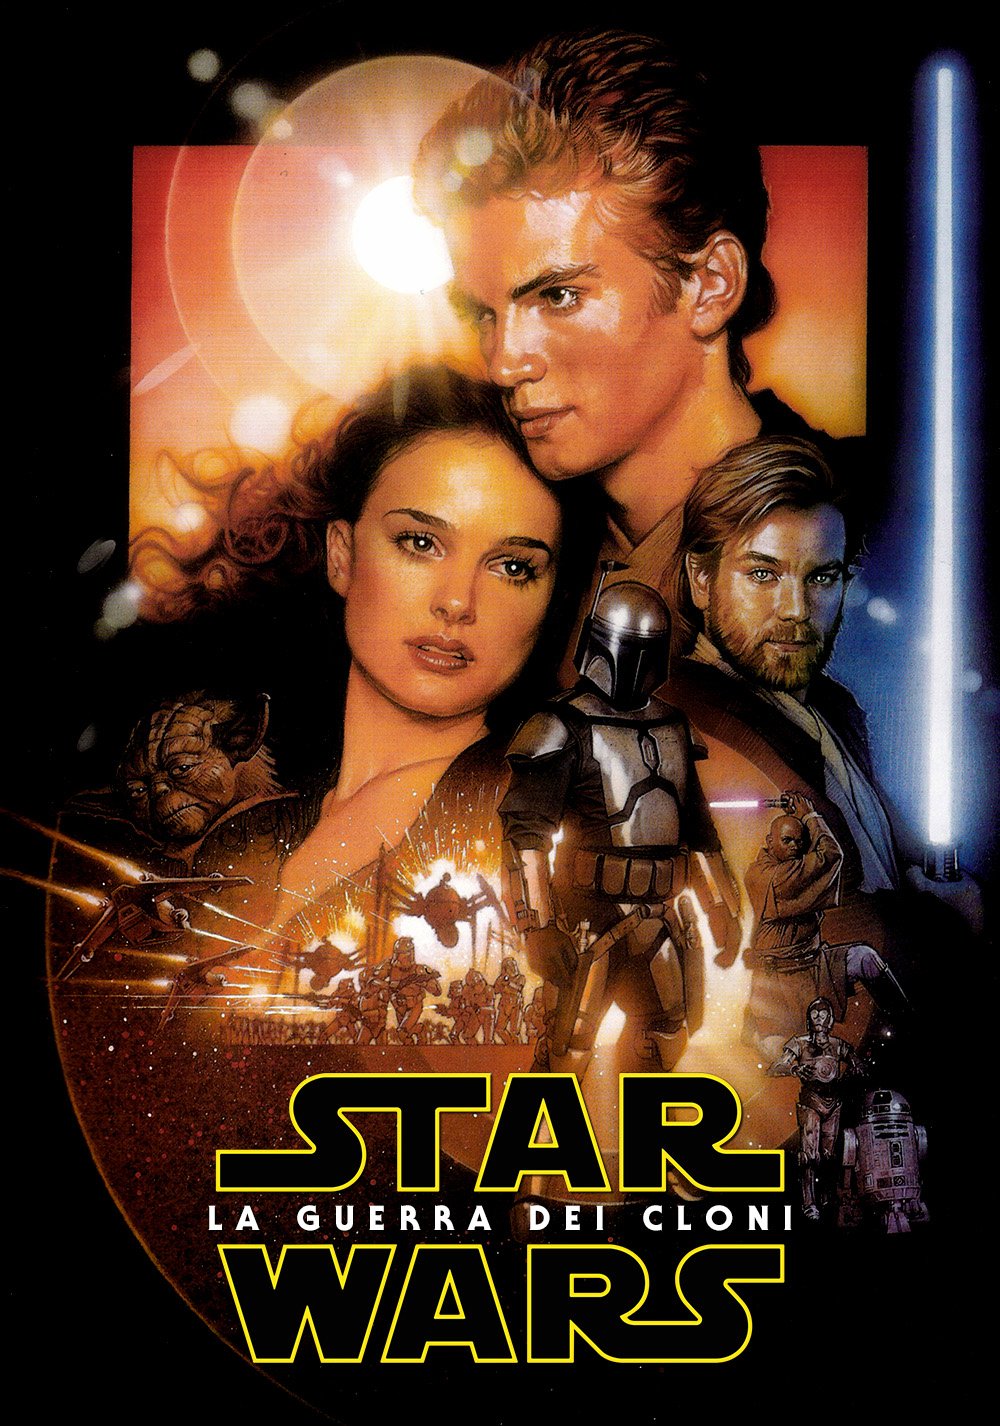 Star Wars Episode II: Attack Of The Clones Movie Poster - ID: 124924